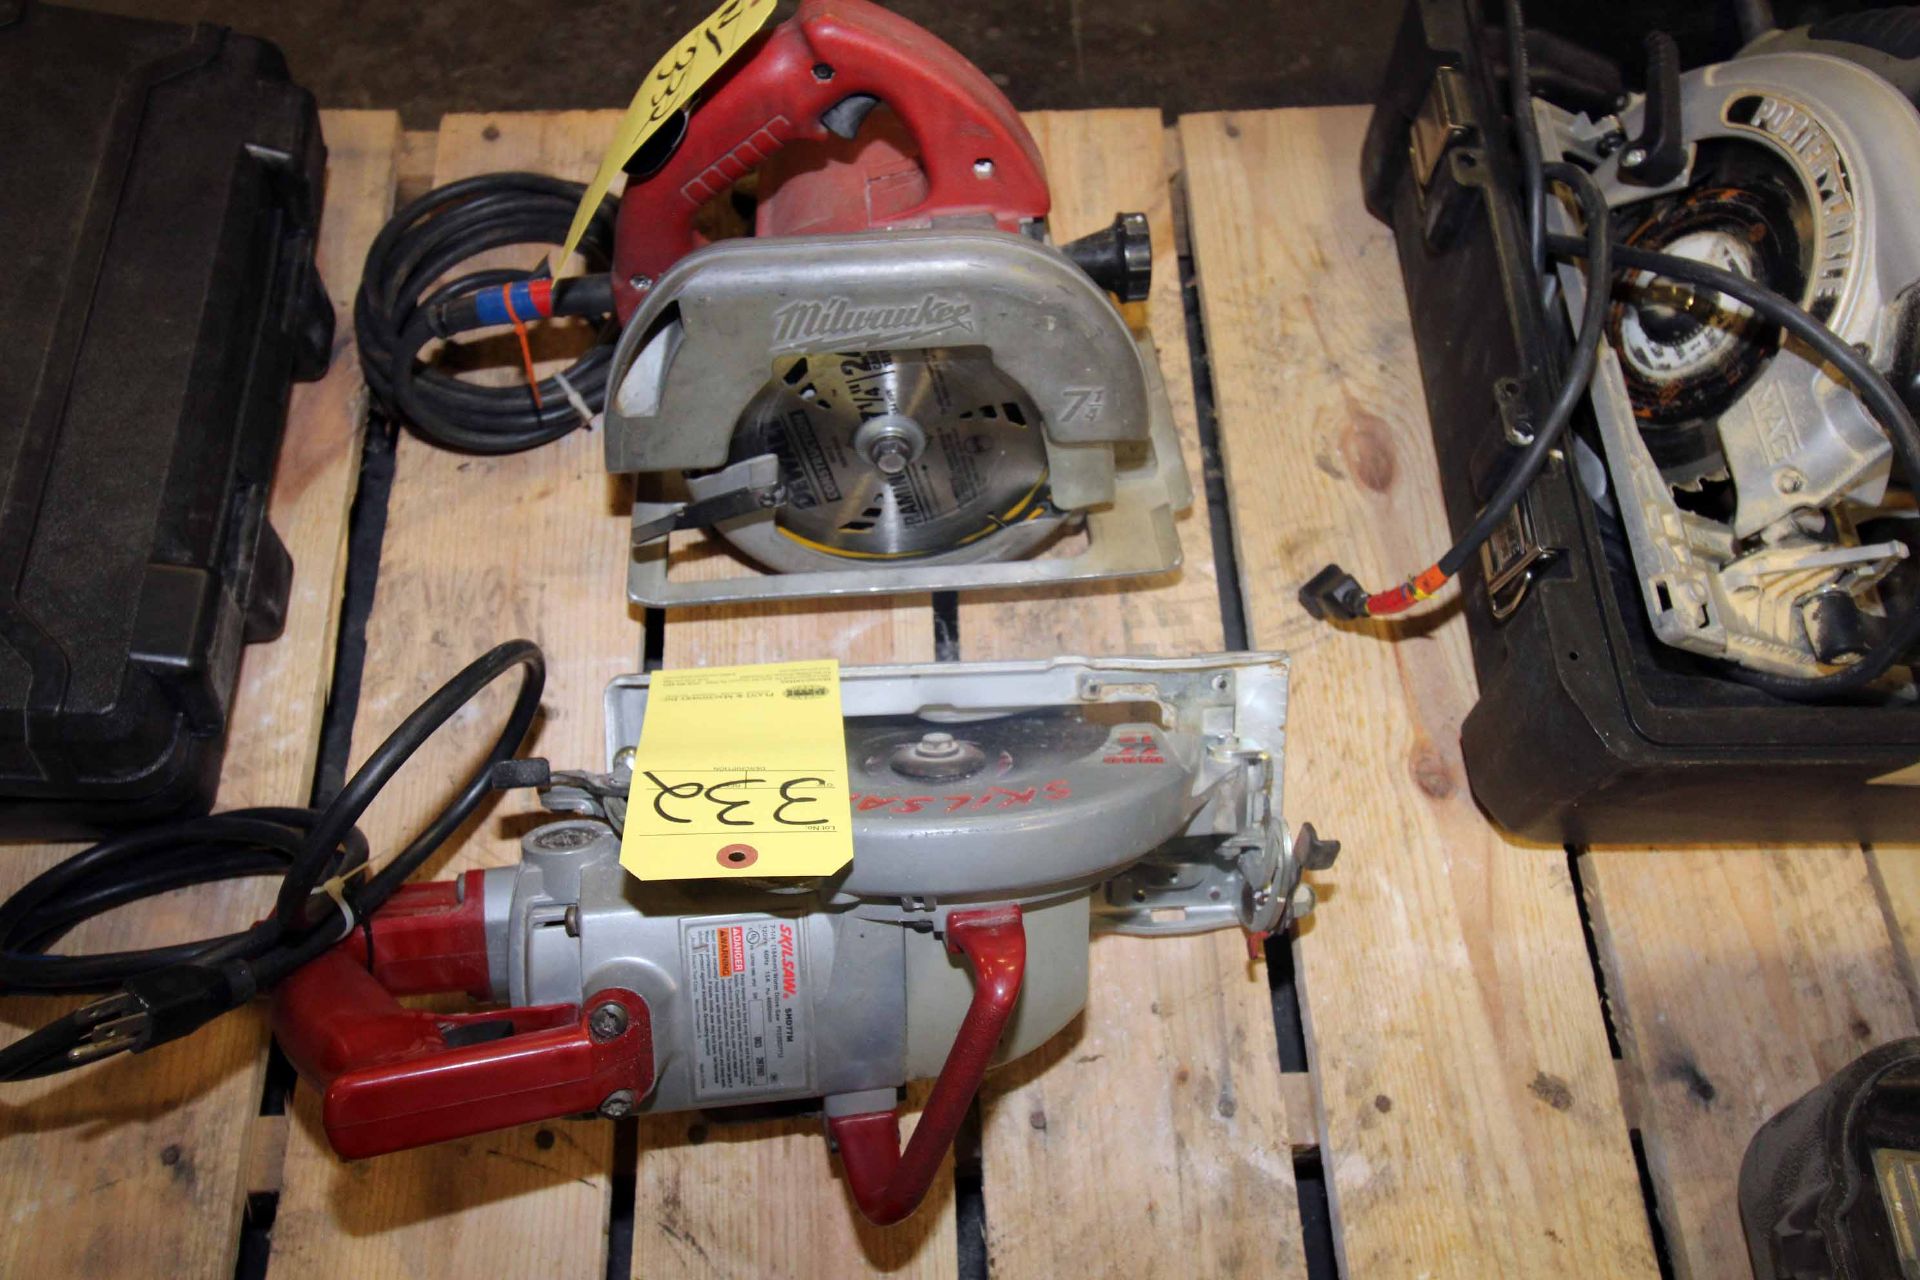 LOT OF HAND SAWS (2): (1) Skill Saw Mdl. SHD77M, 7-1/4", (1) Milwaukee Mdl. 6365, 7-1/4" - Image 3 of 3